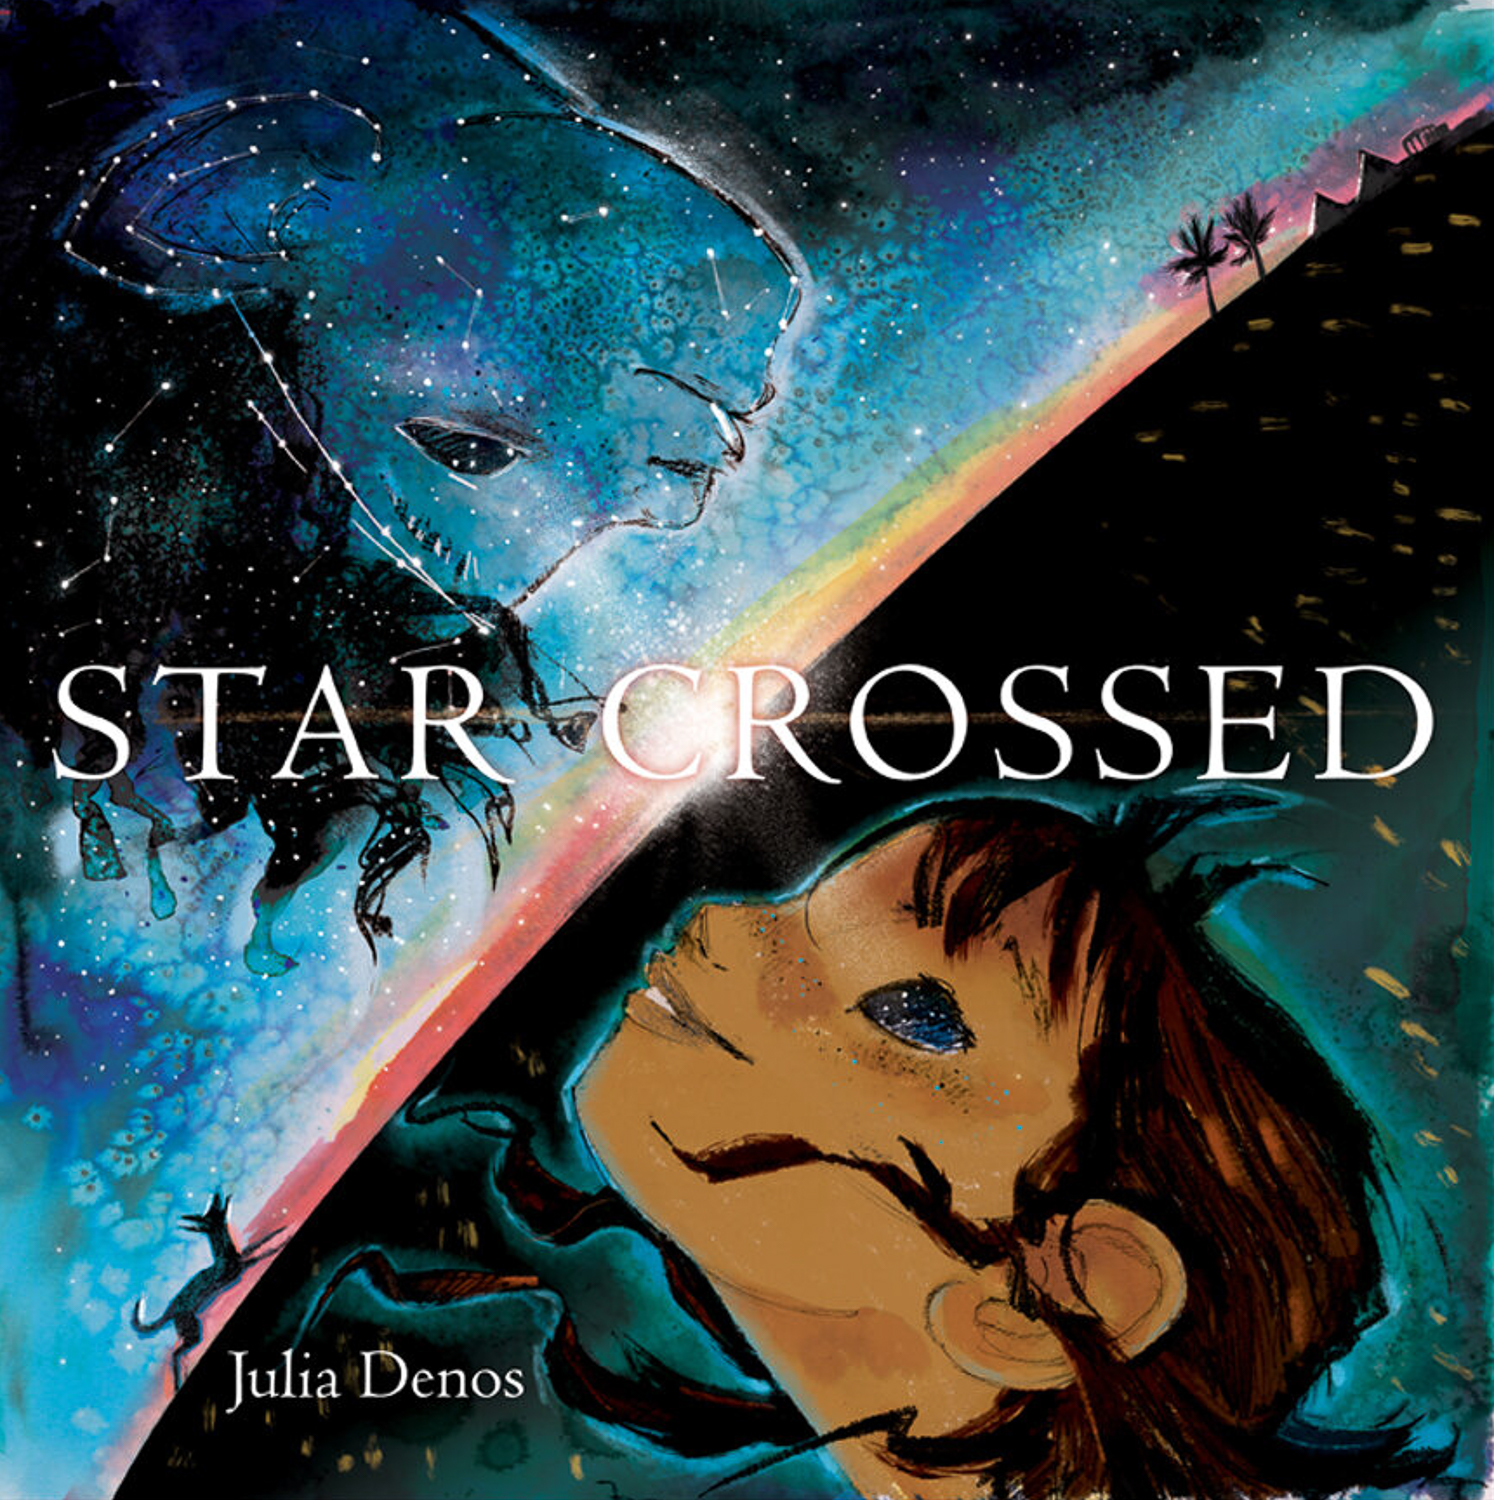 Starcrossed book cover - two children looking at each other, one from space, the other from earth.